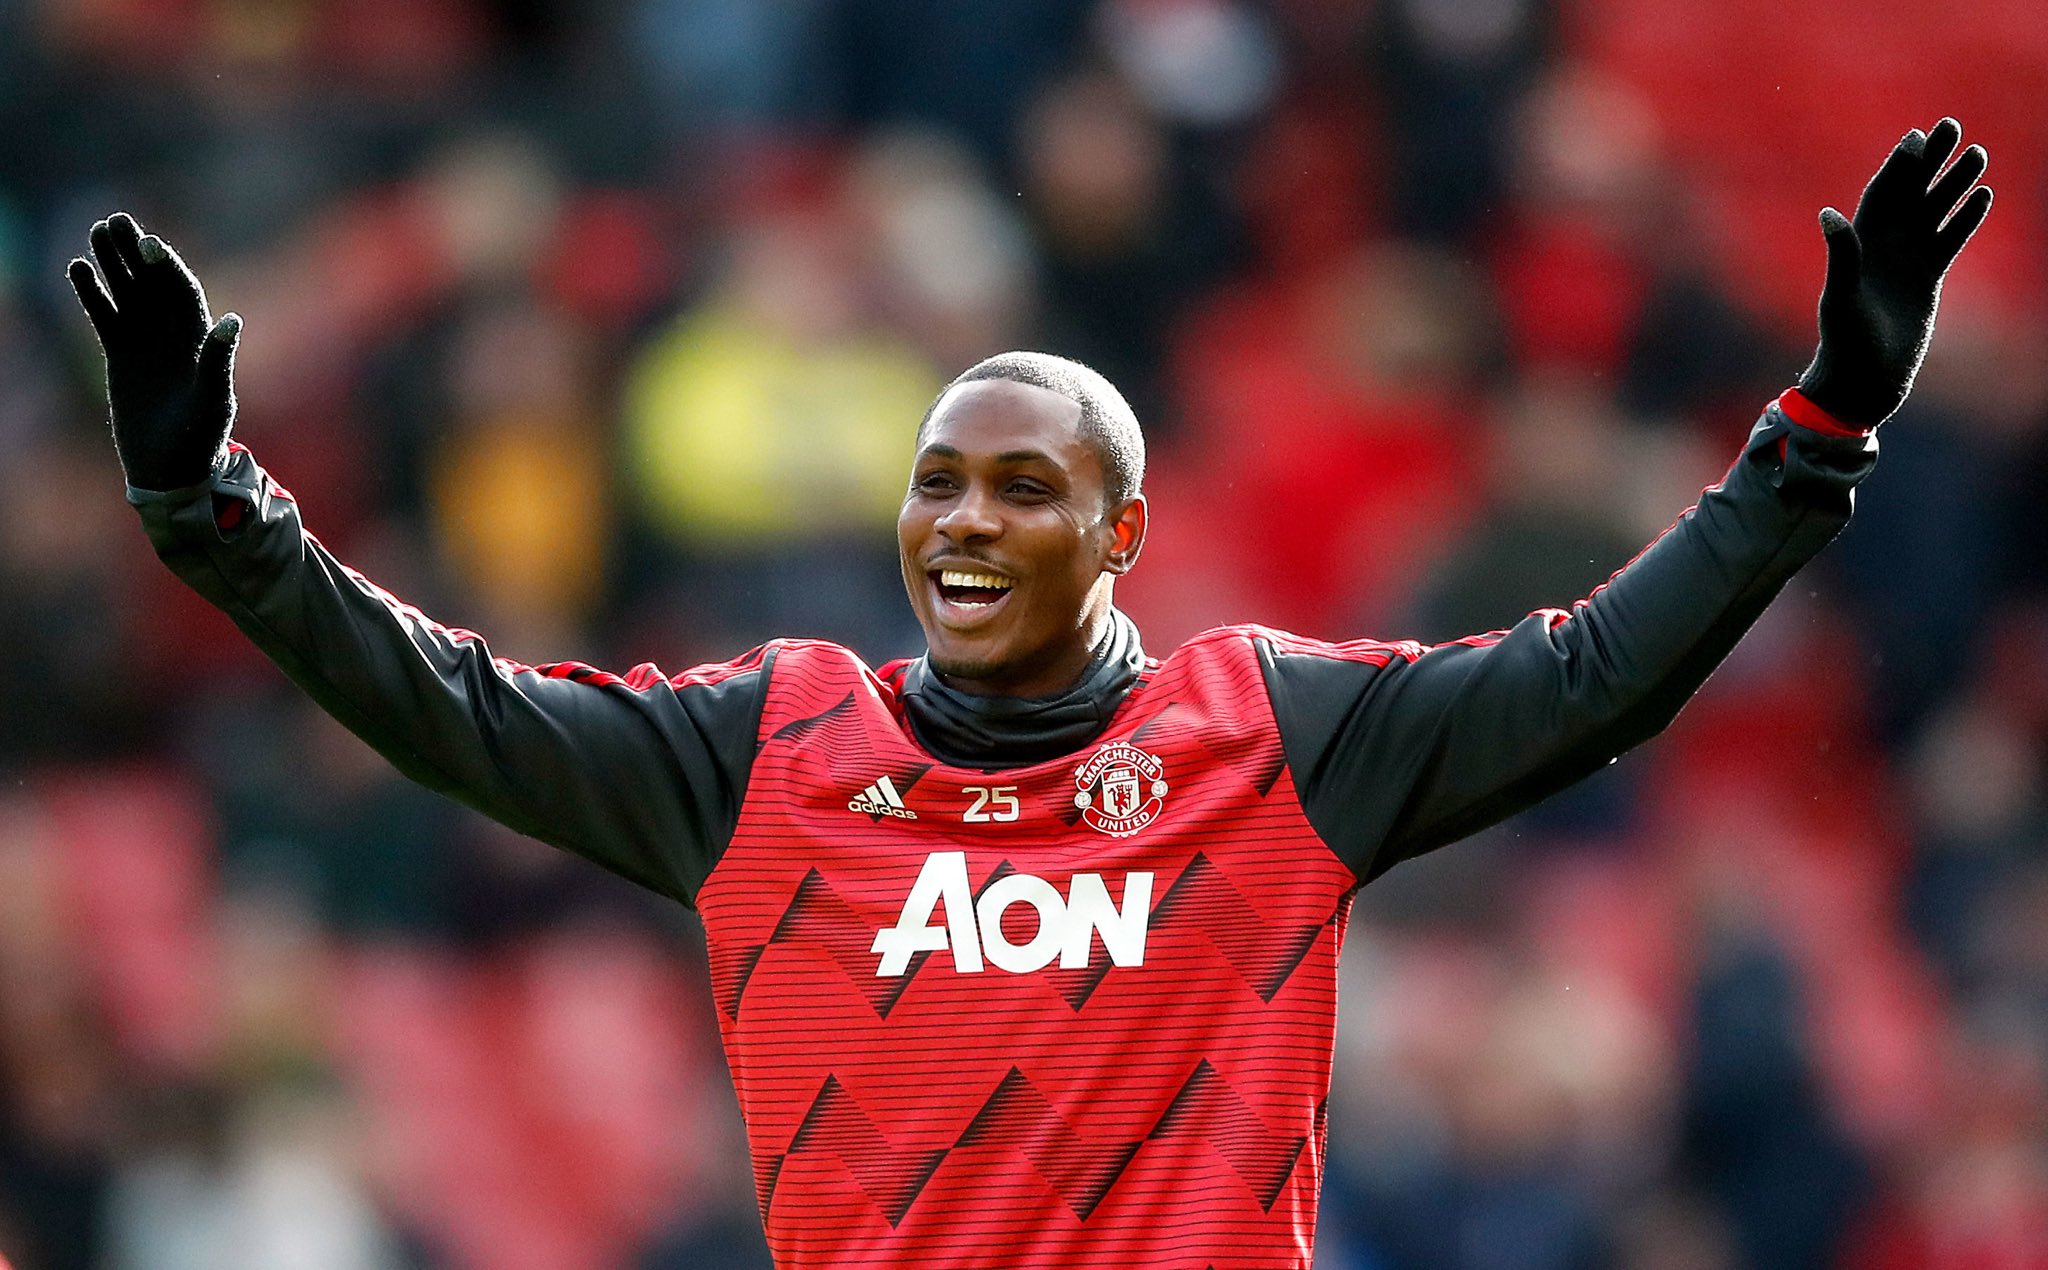 In talks with Shanghai Shenhua over extending Odion Ighalo’s stay, confirms Ole Gunnar Solskjaer